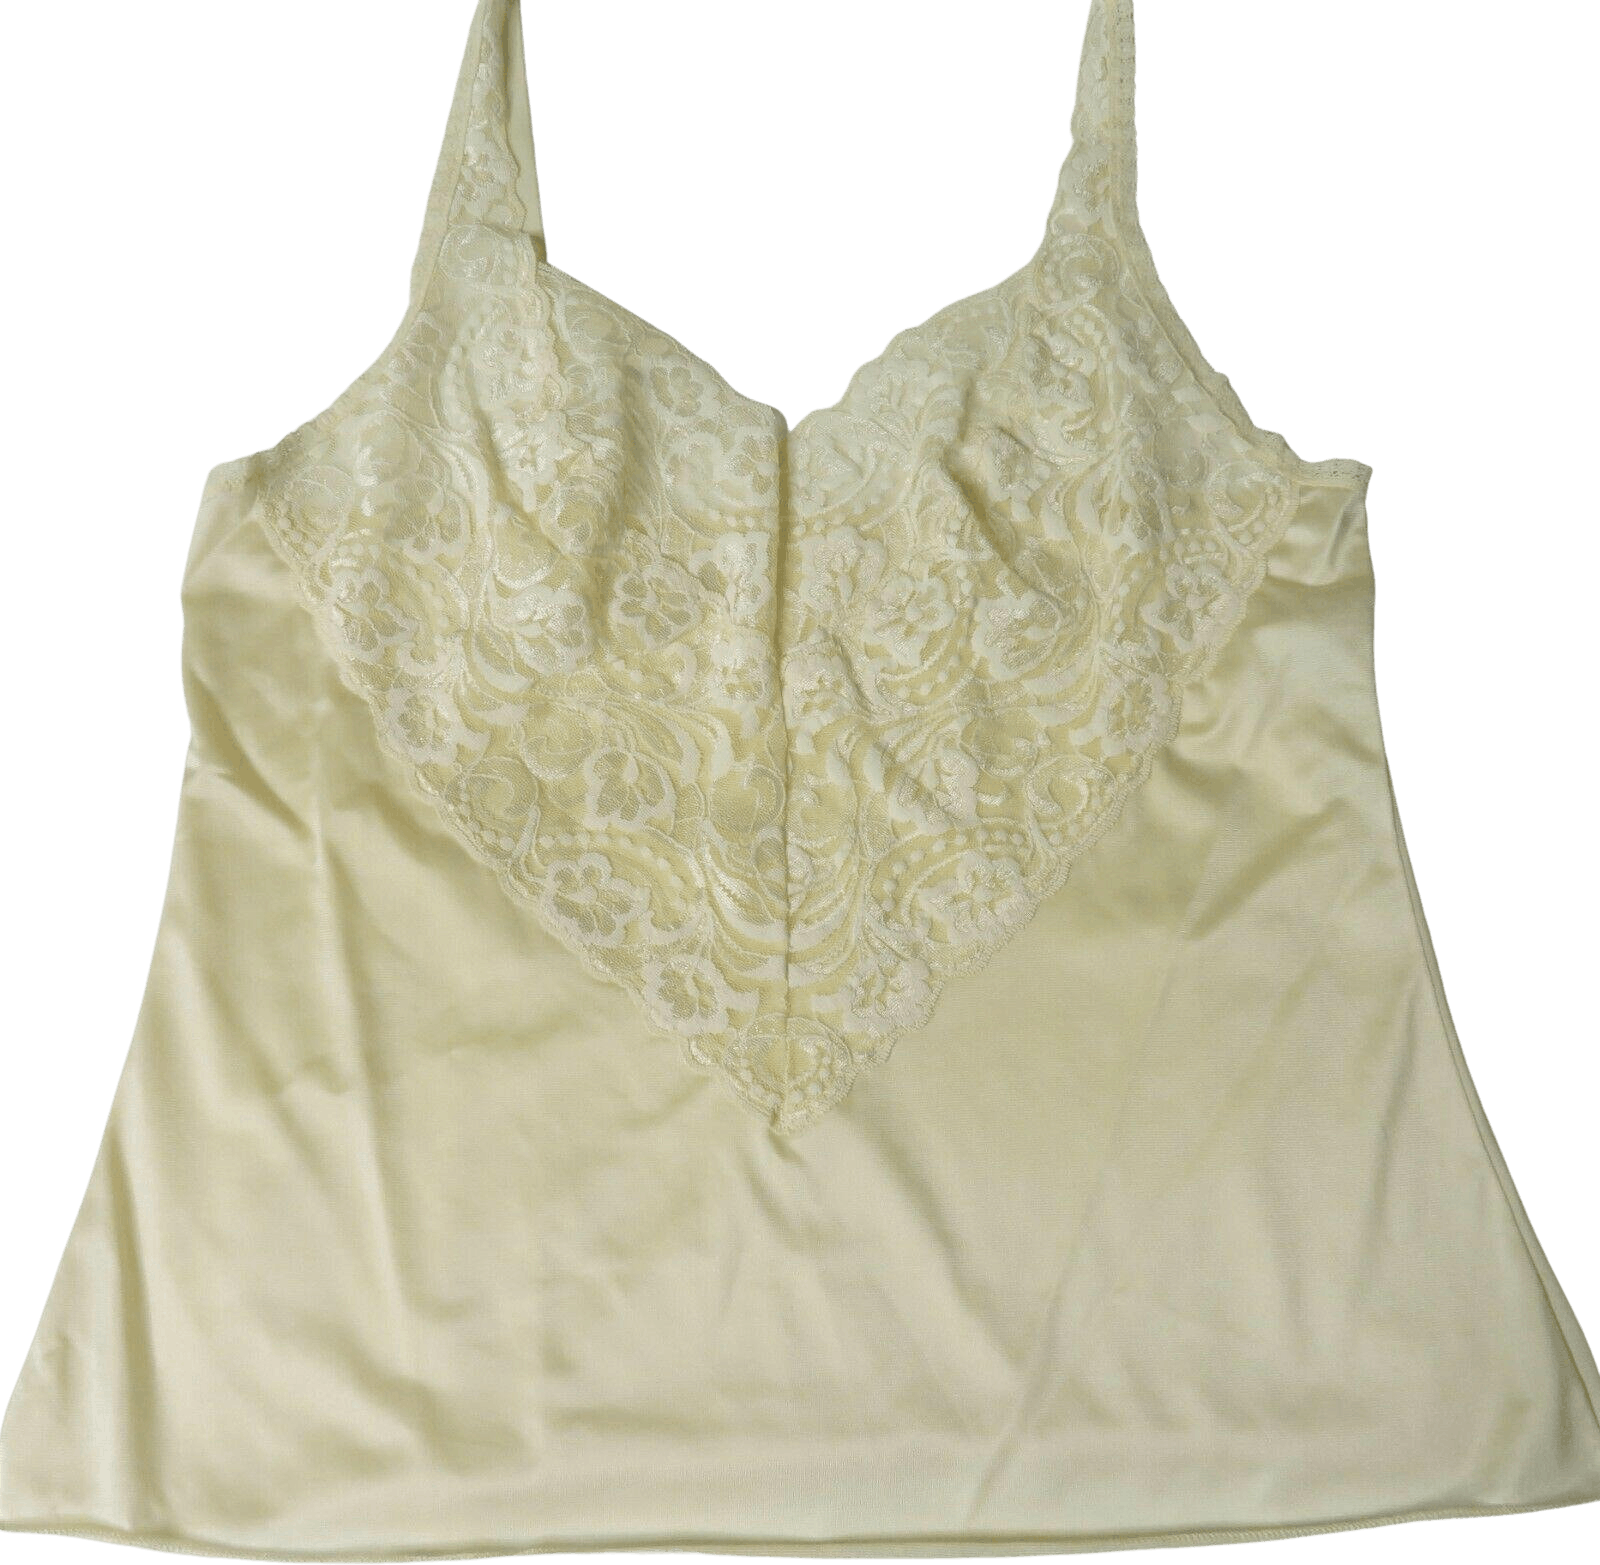 Vintage 70s Beige Lace Camisole Tank Top Cami By Vanity Fair